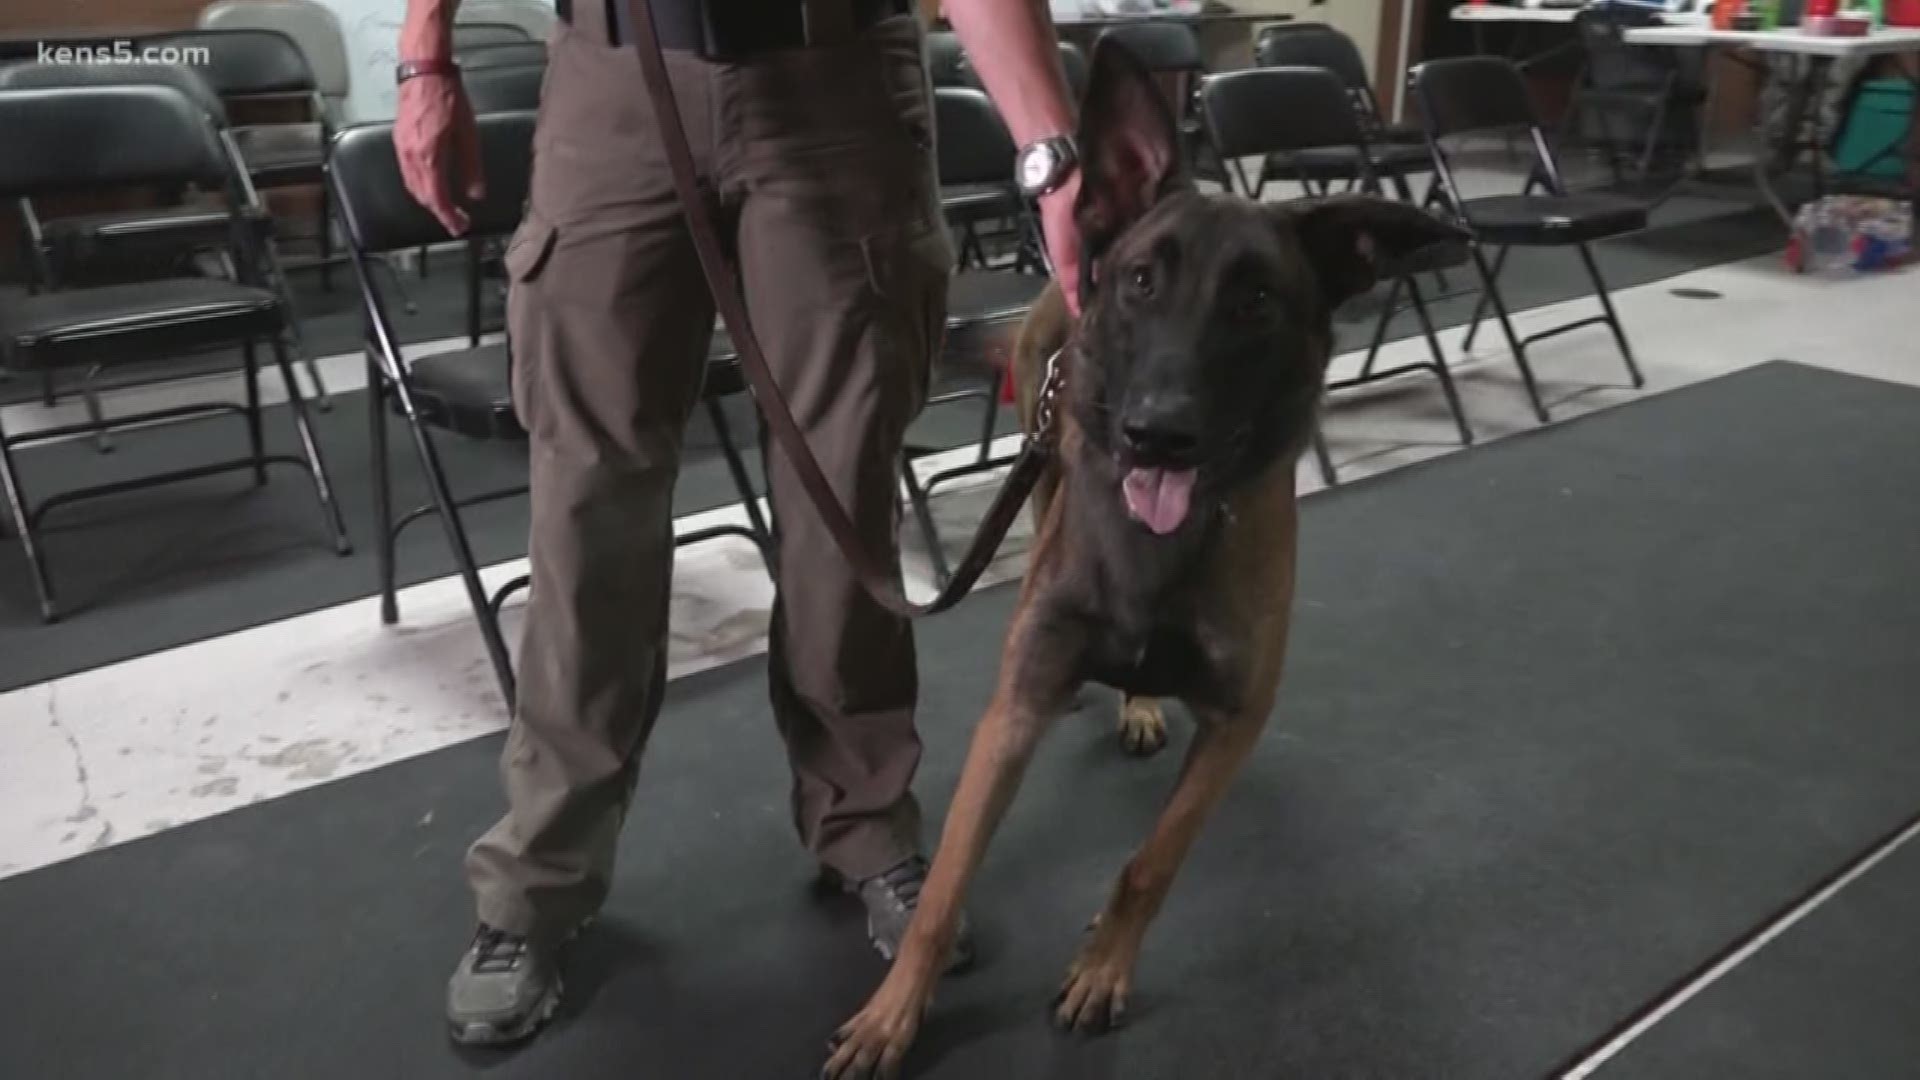 Our nation's brave and loyal four-legged troops are prepared for the front lines here in San Antonio, thanks in part to a longstanding training program made possible through local families and their open hearts